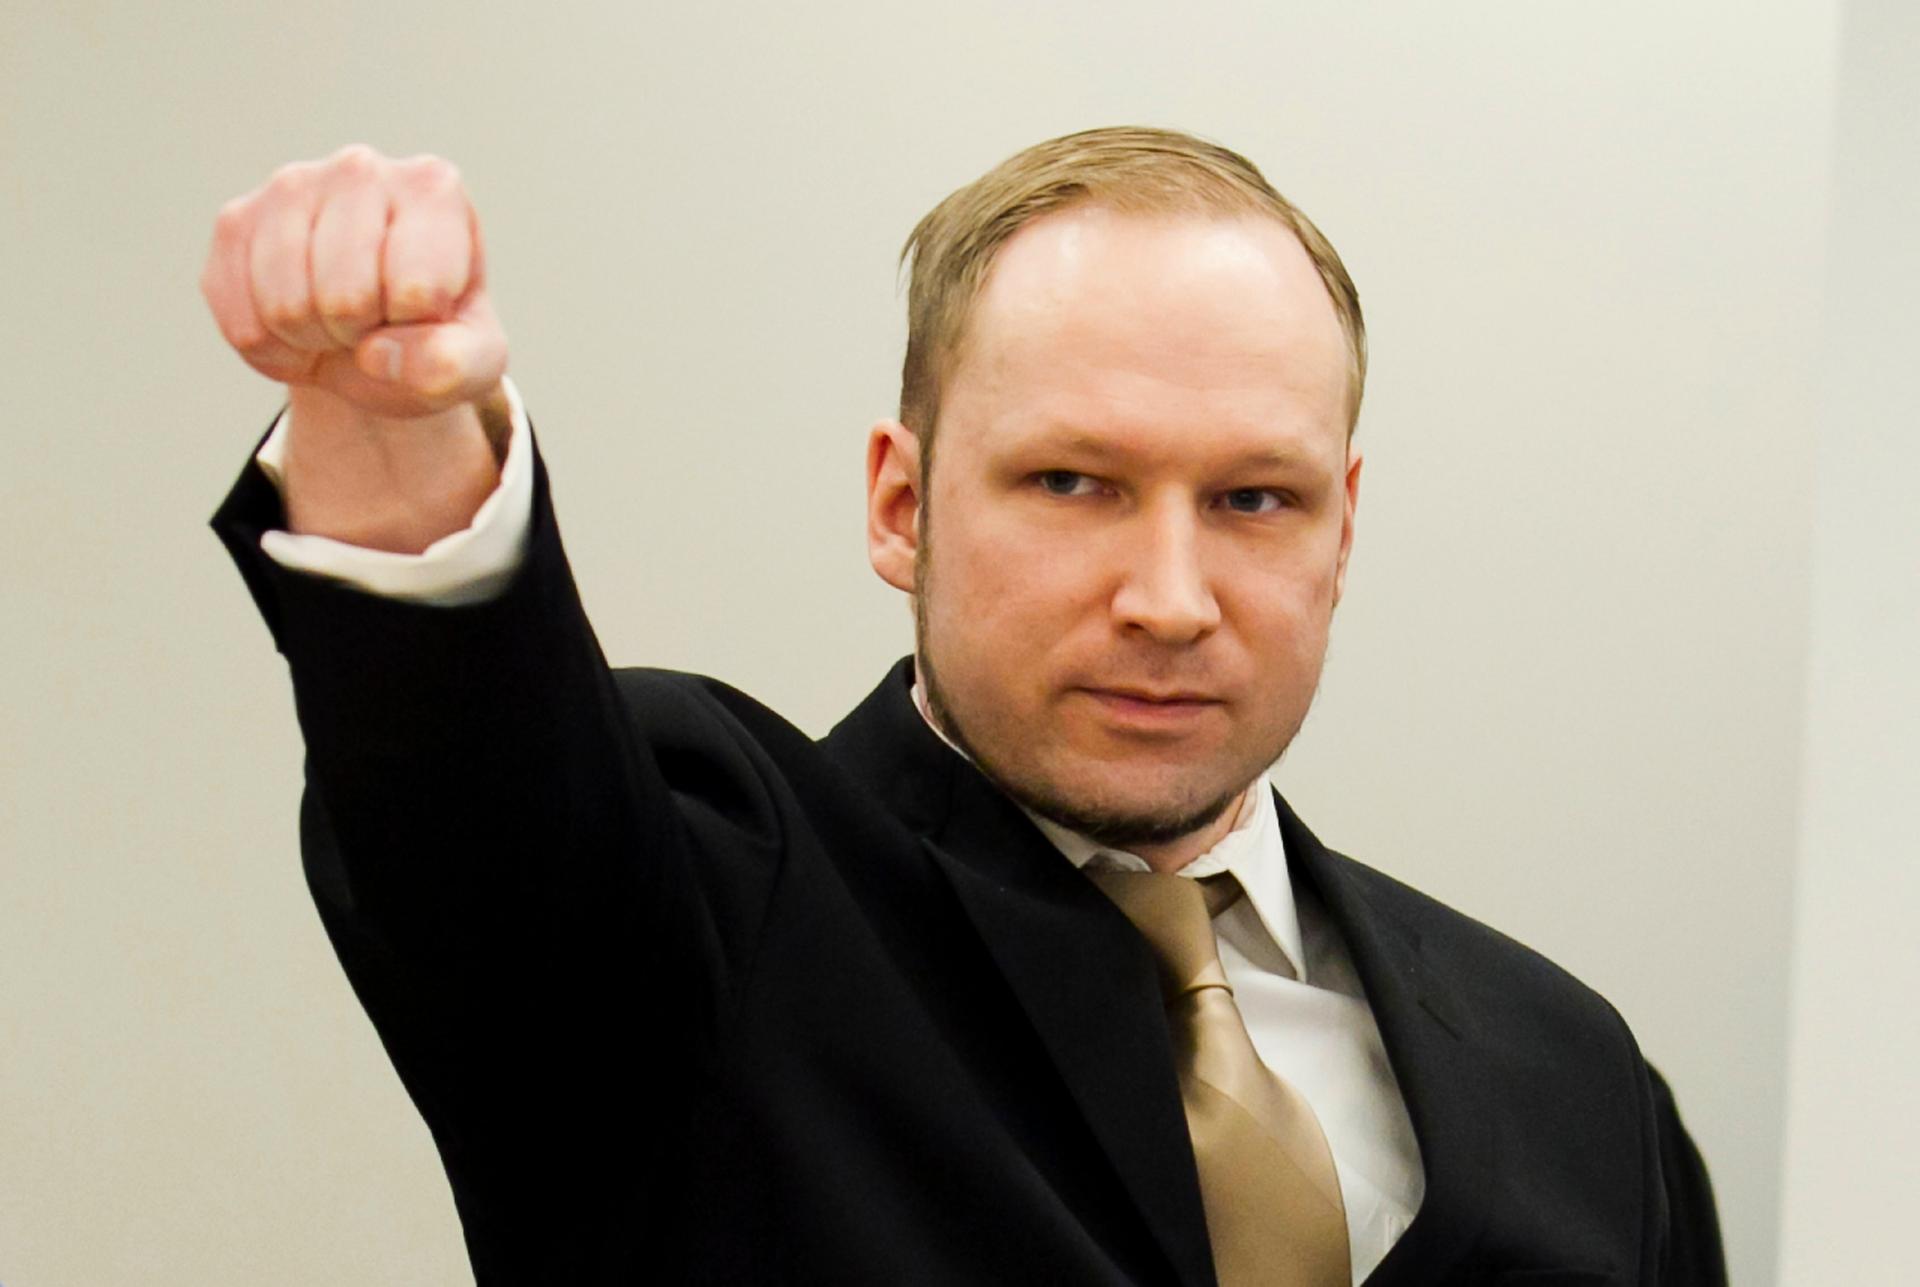 Norwegian mass killer Anders Behring Breivik gestures as he arrives for his terrorism and murder trial in a courtroom in Oslo April 16, 2012.